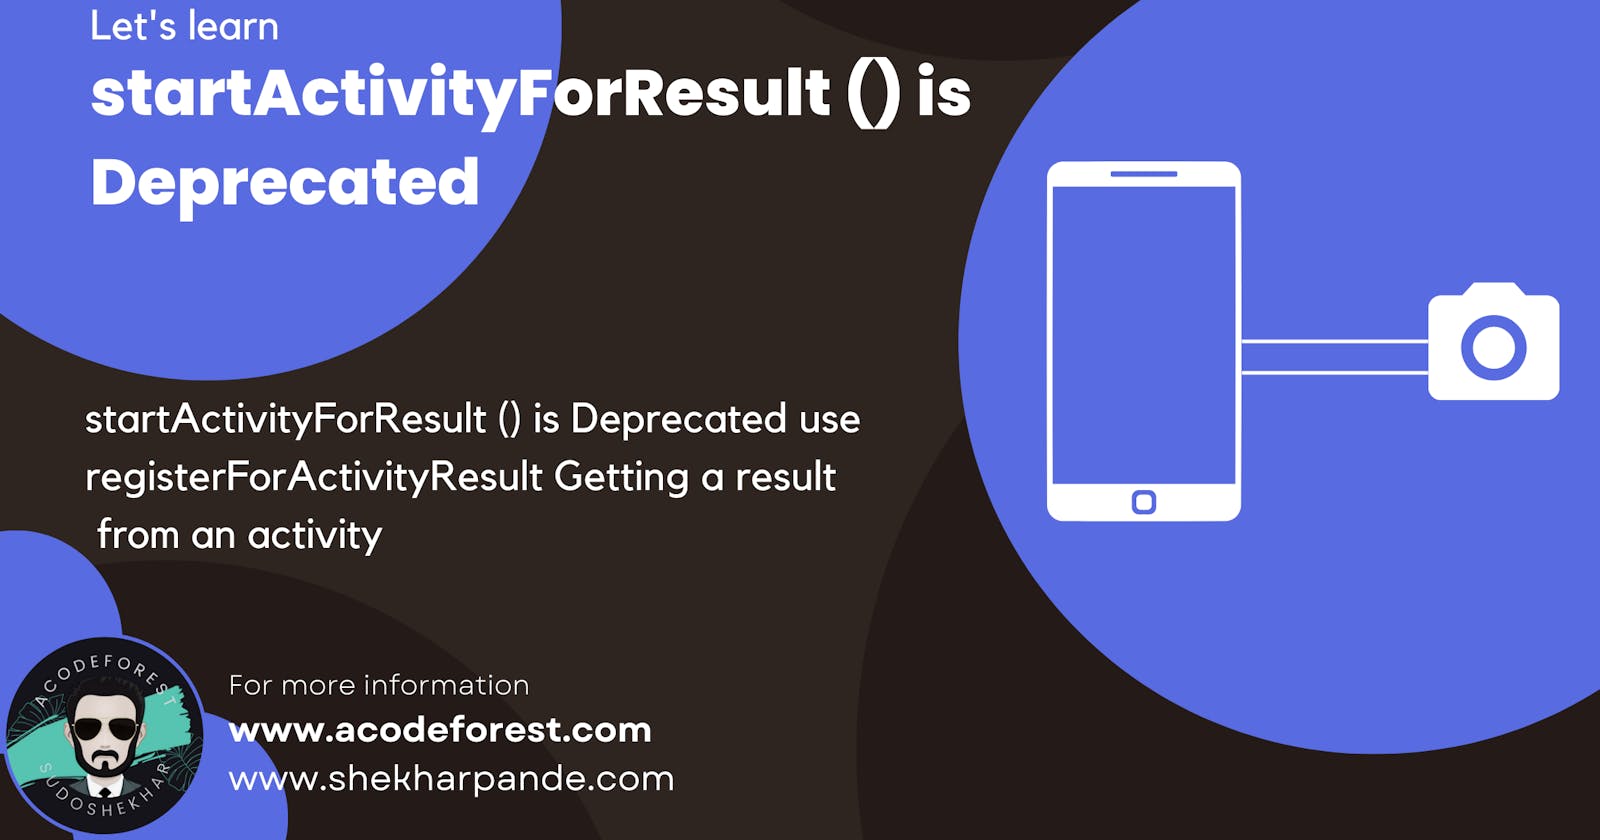 startActivityForResult () is Deprecated
use registerForActivityResult Getting a result from an activity